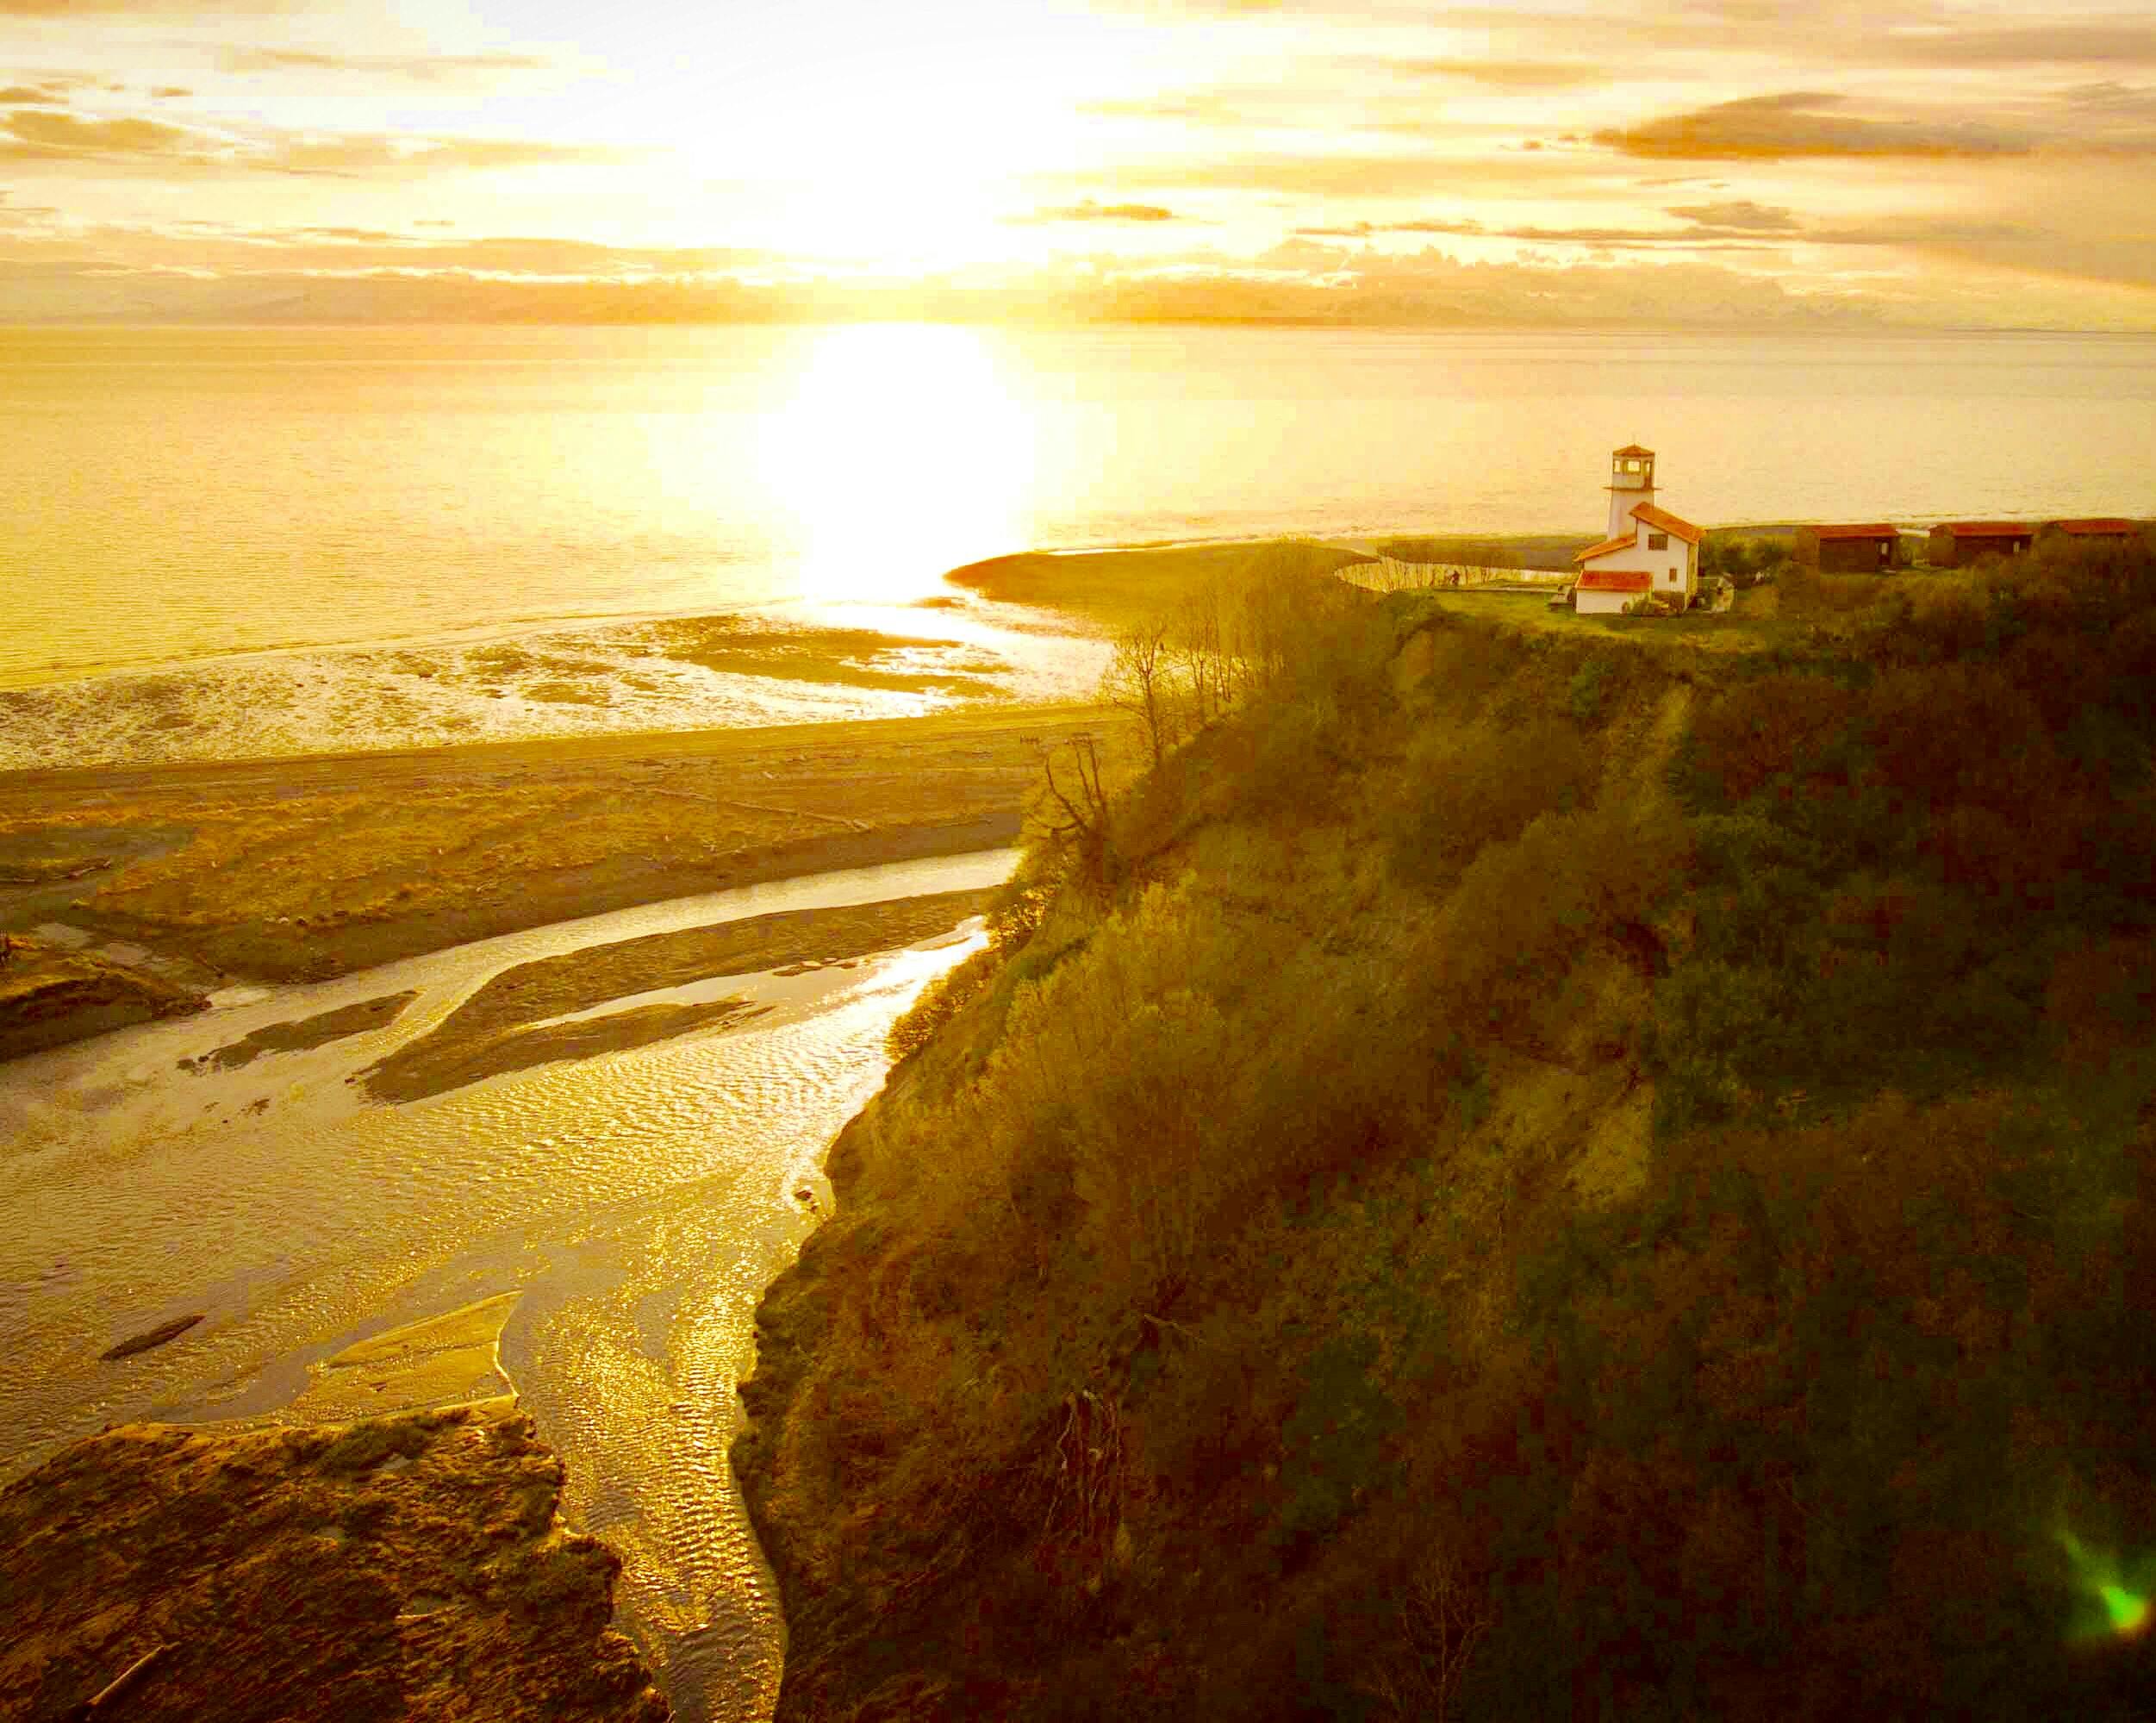 The lighthouse, perched on th bluff overlooking the mouth of Deep Creek and the shores of Cook Inlet